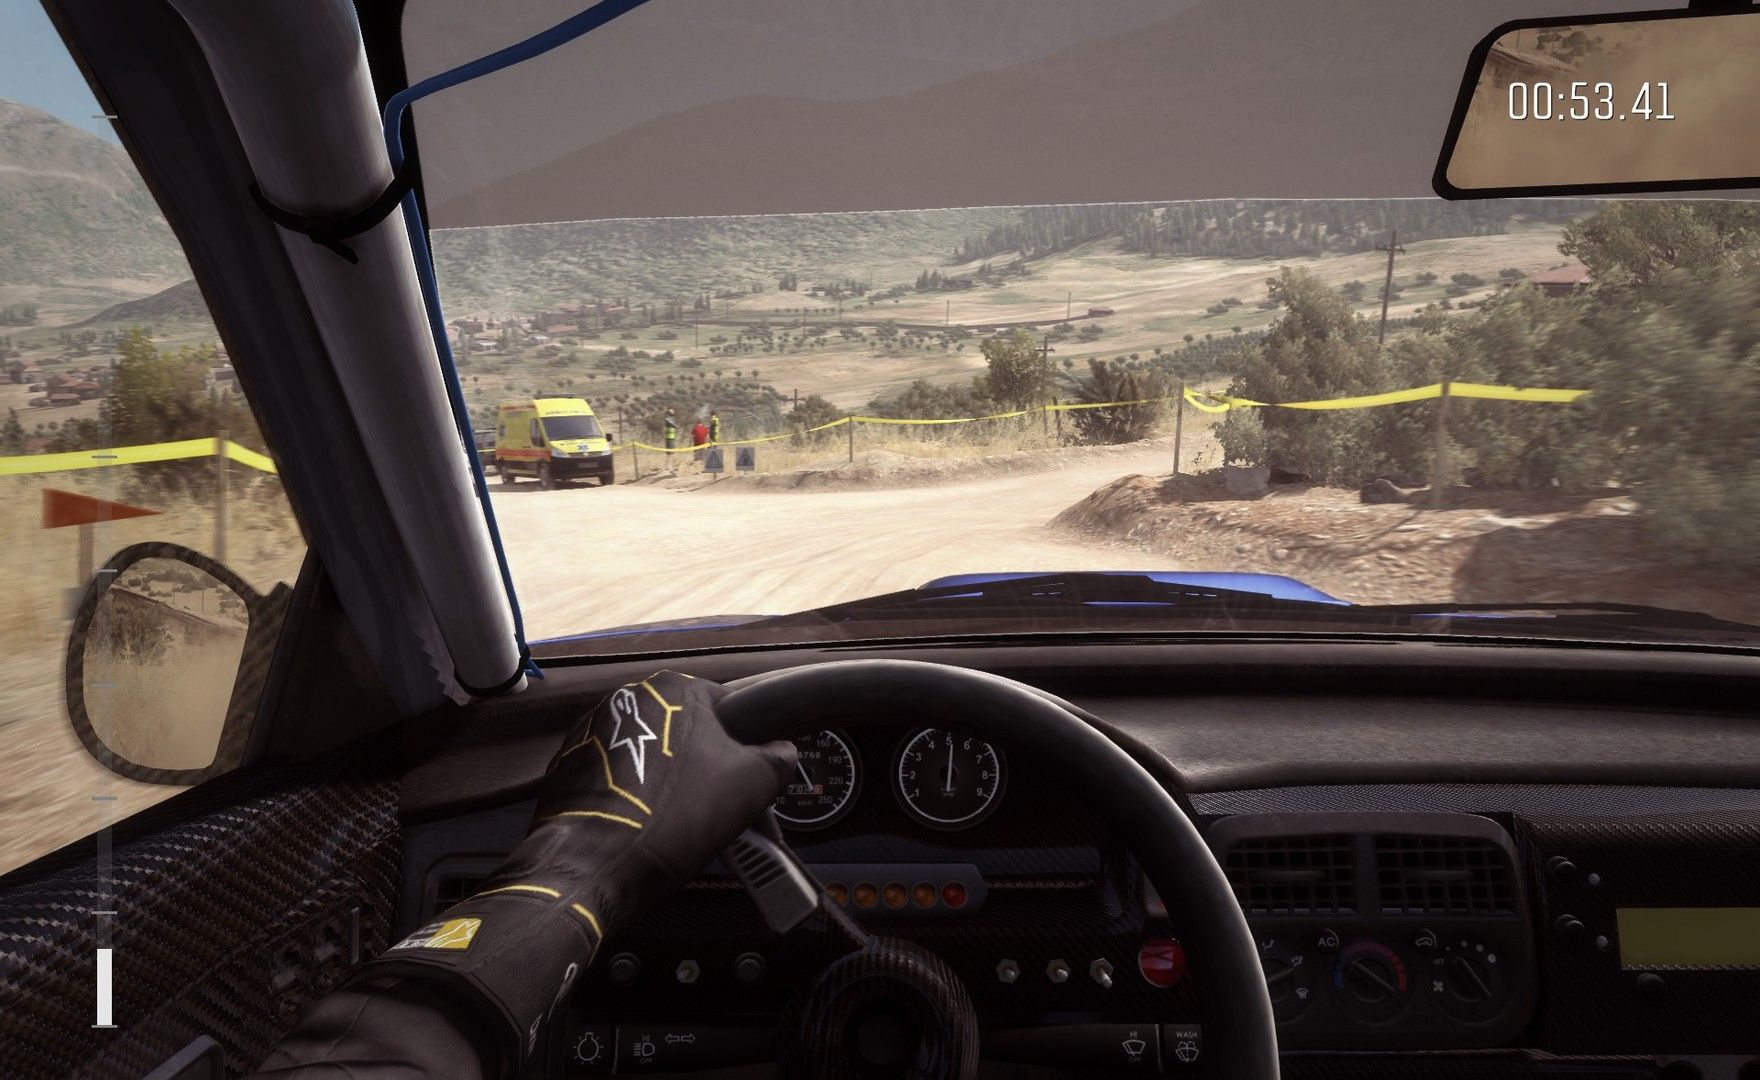 DirtRally